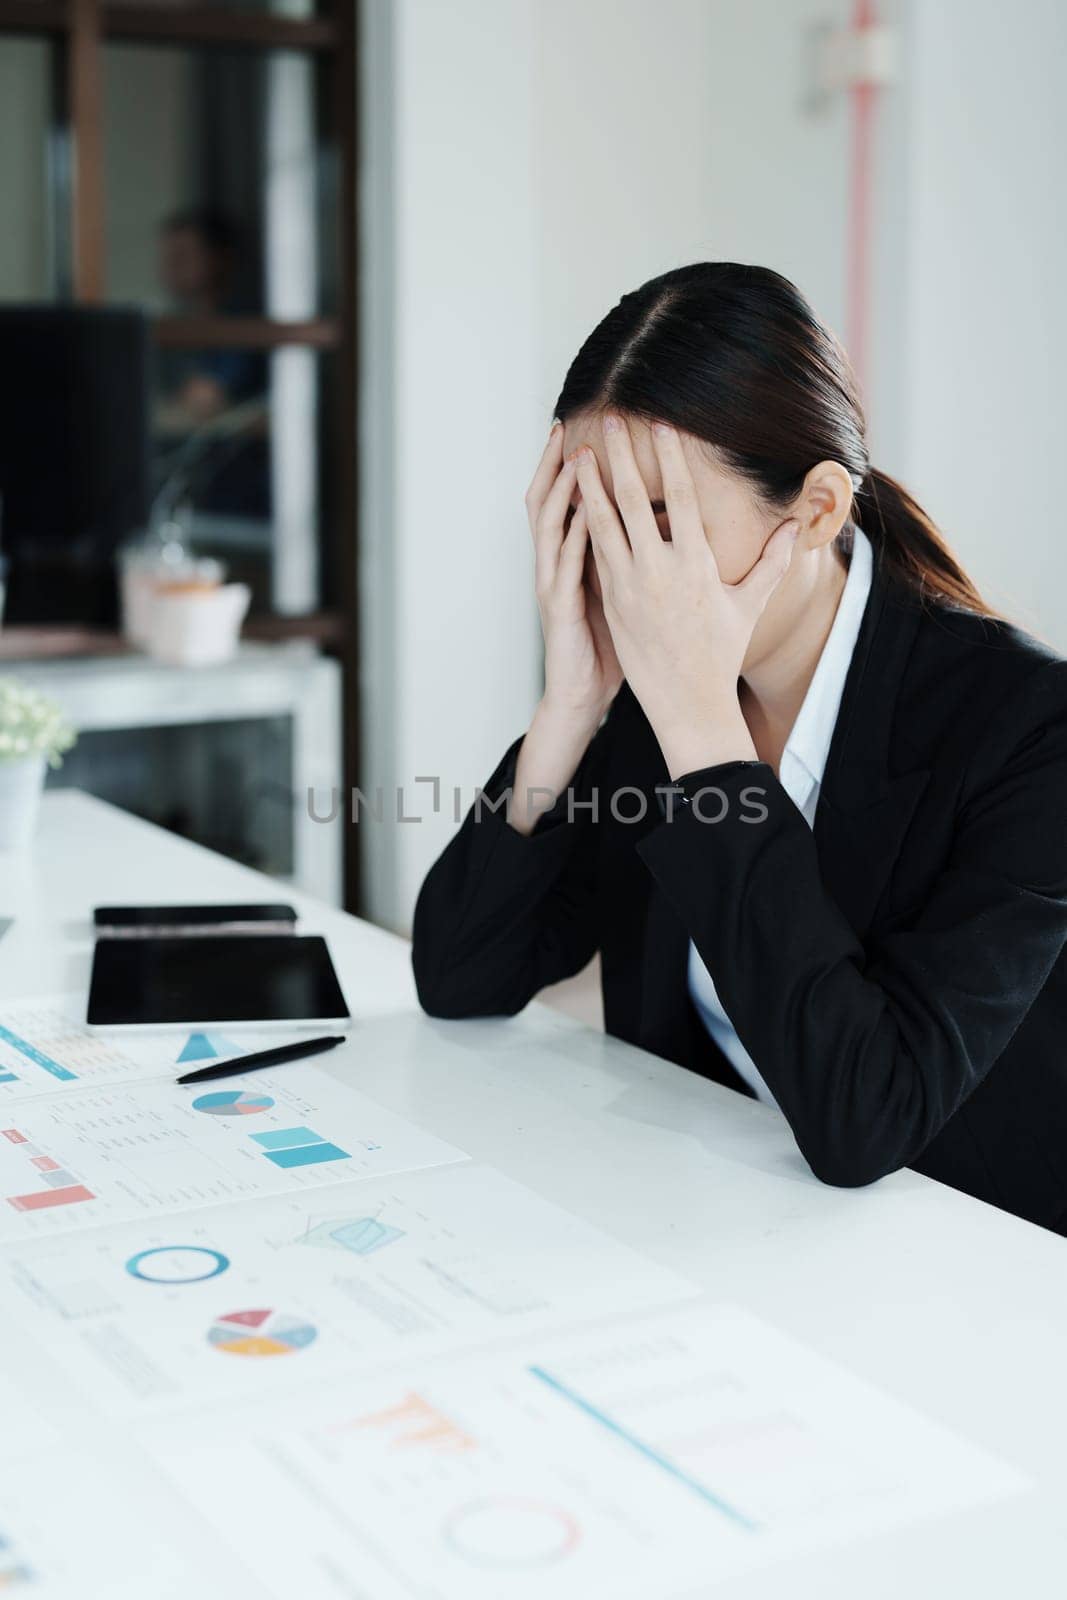 A portrait of a beautiful Asian female employee showing a stressed face while using financial documents on her desk.